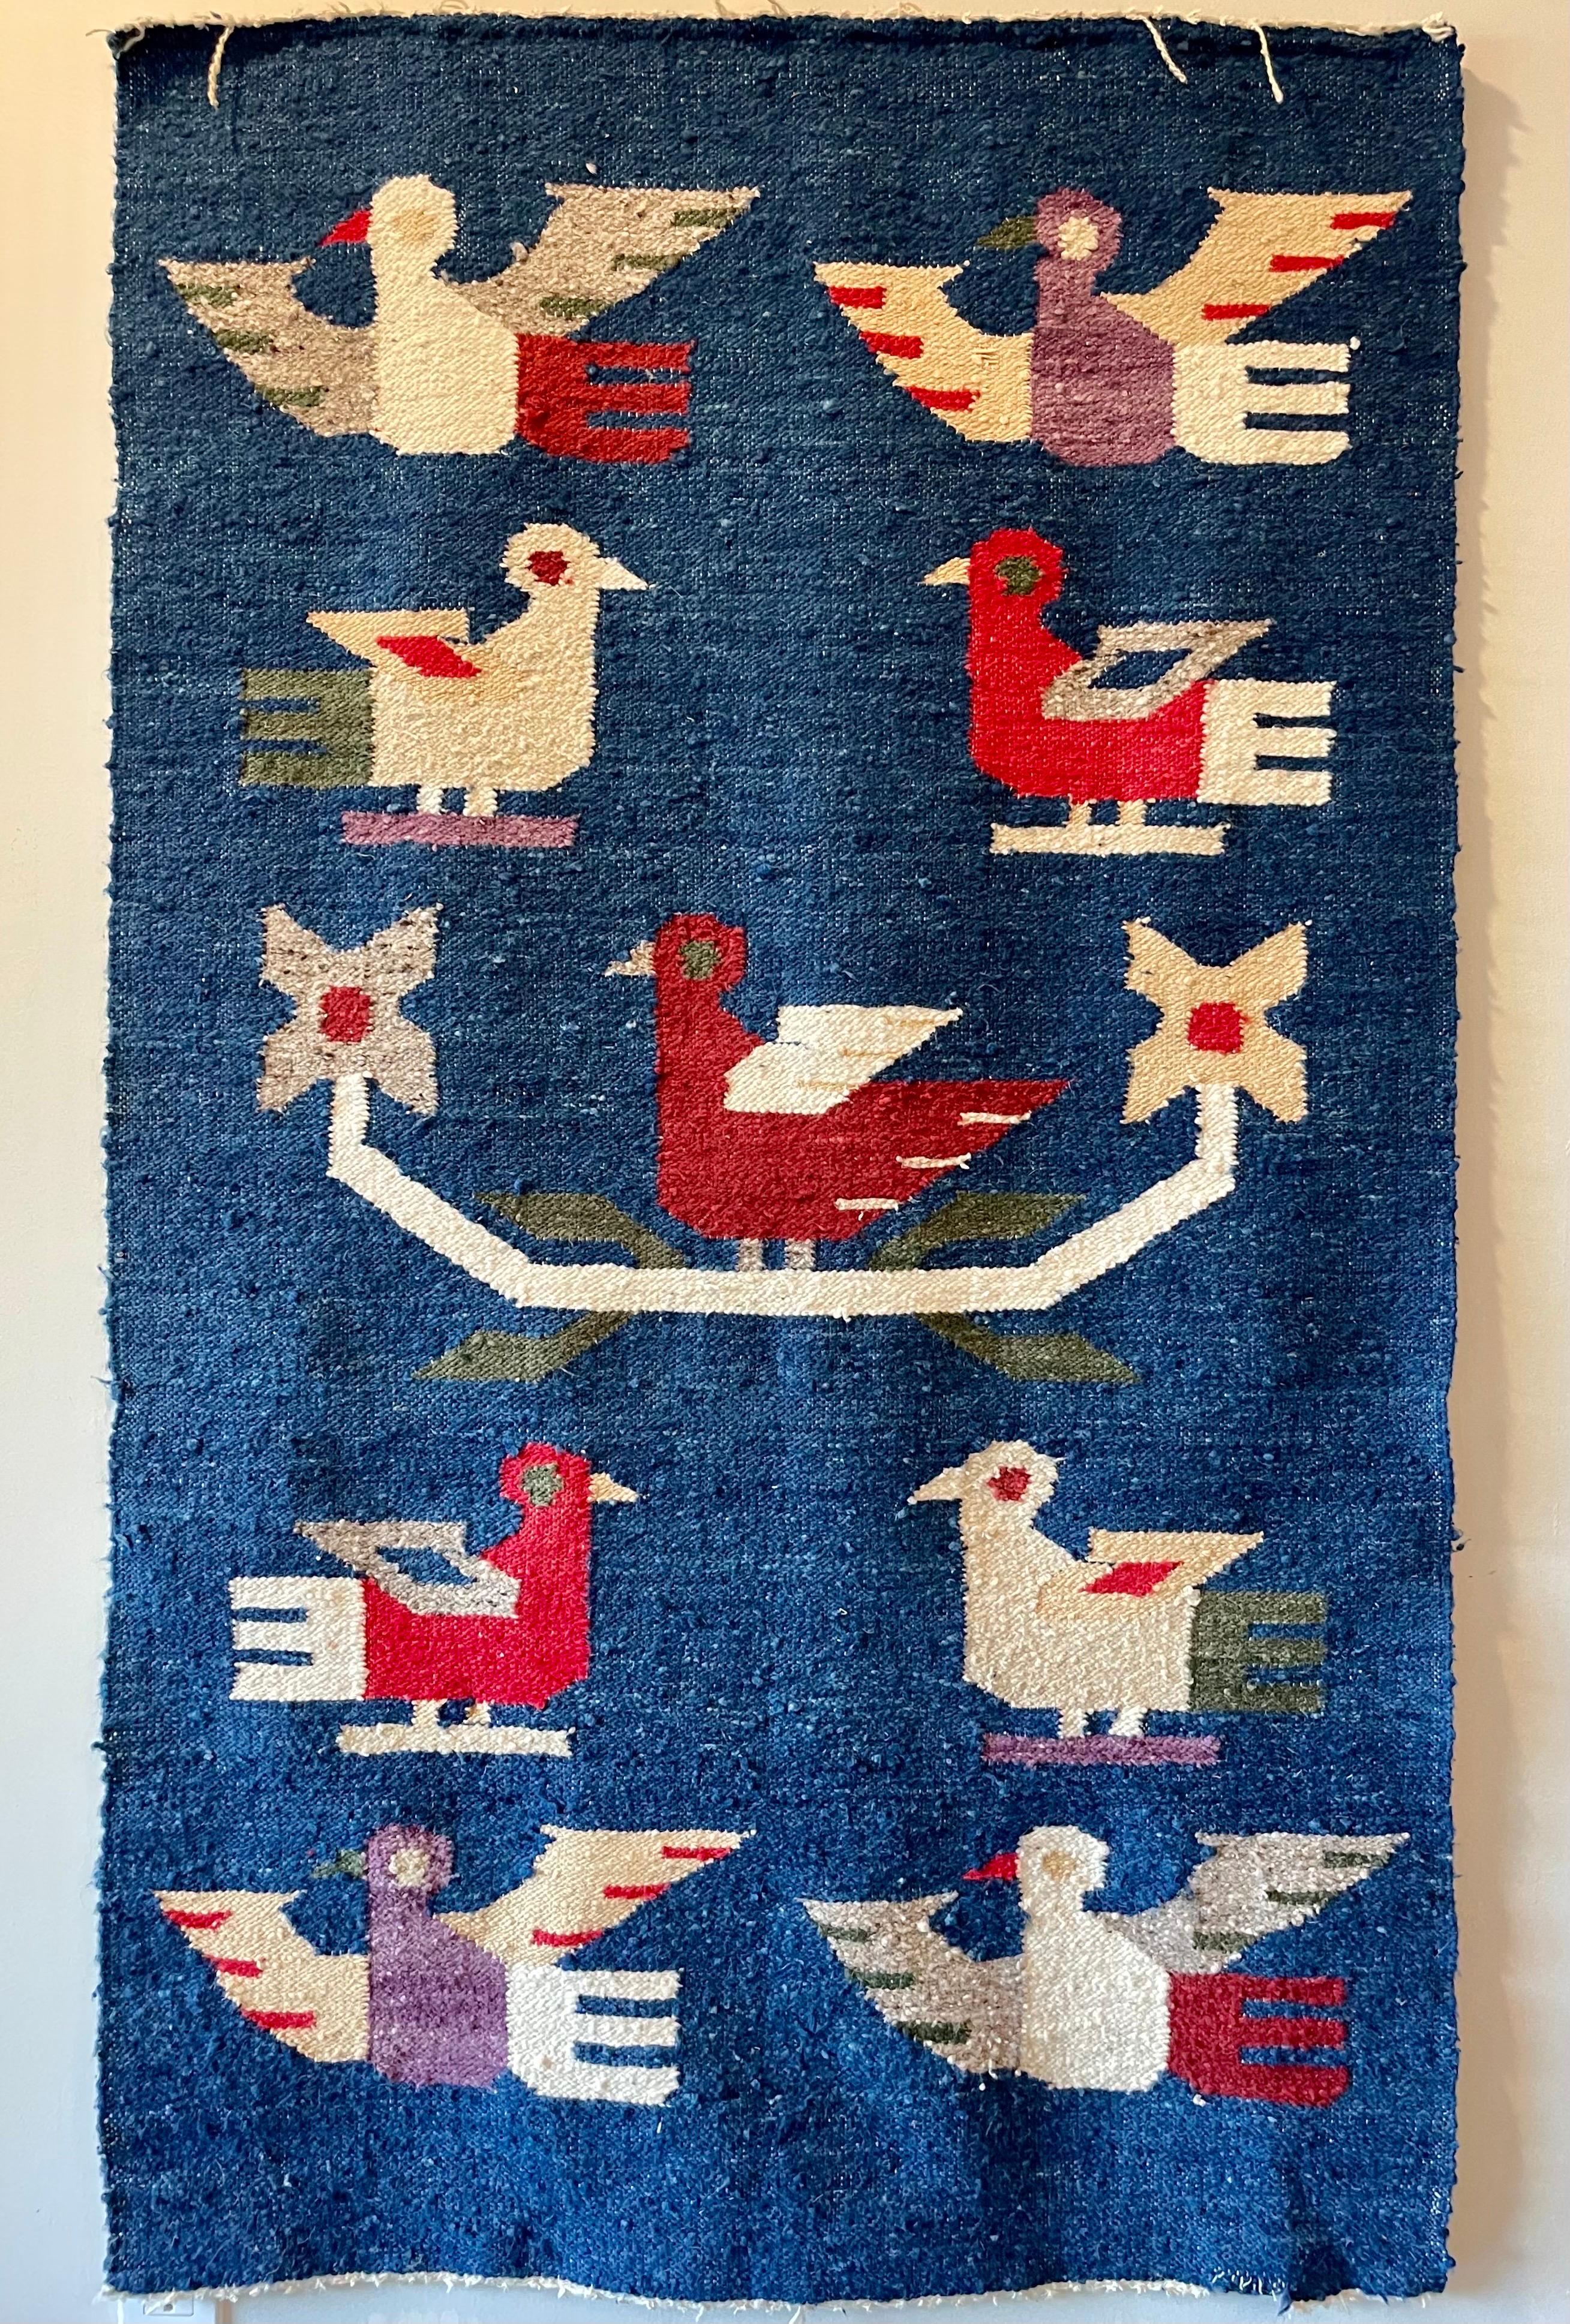 Lovely hand-woven wool tapestry thought to be either Danish or Swedish based upon the estate it came from. Excellent colors and birds and flowers. 
54